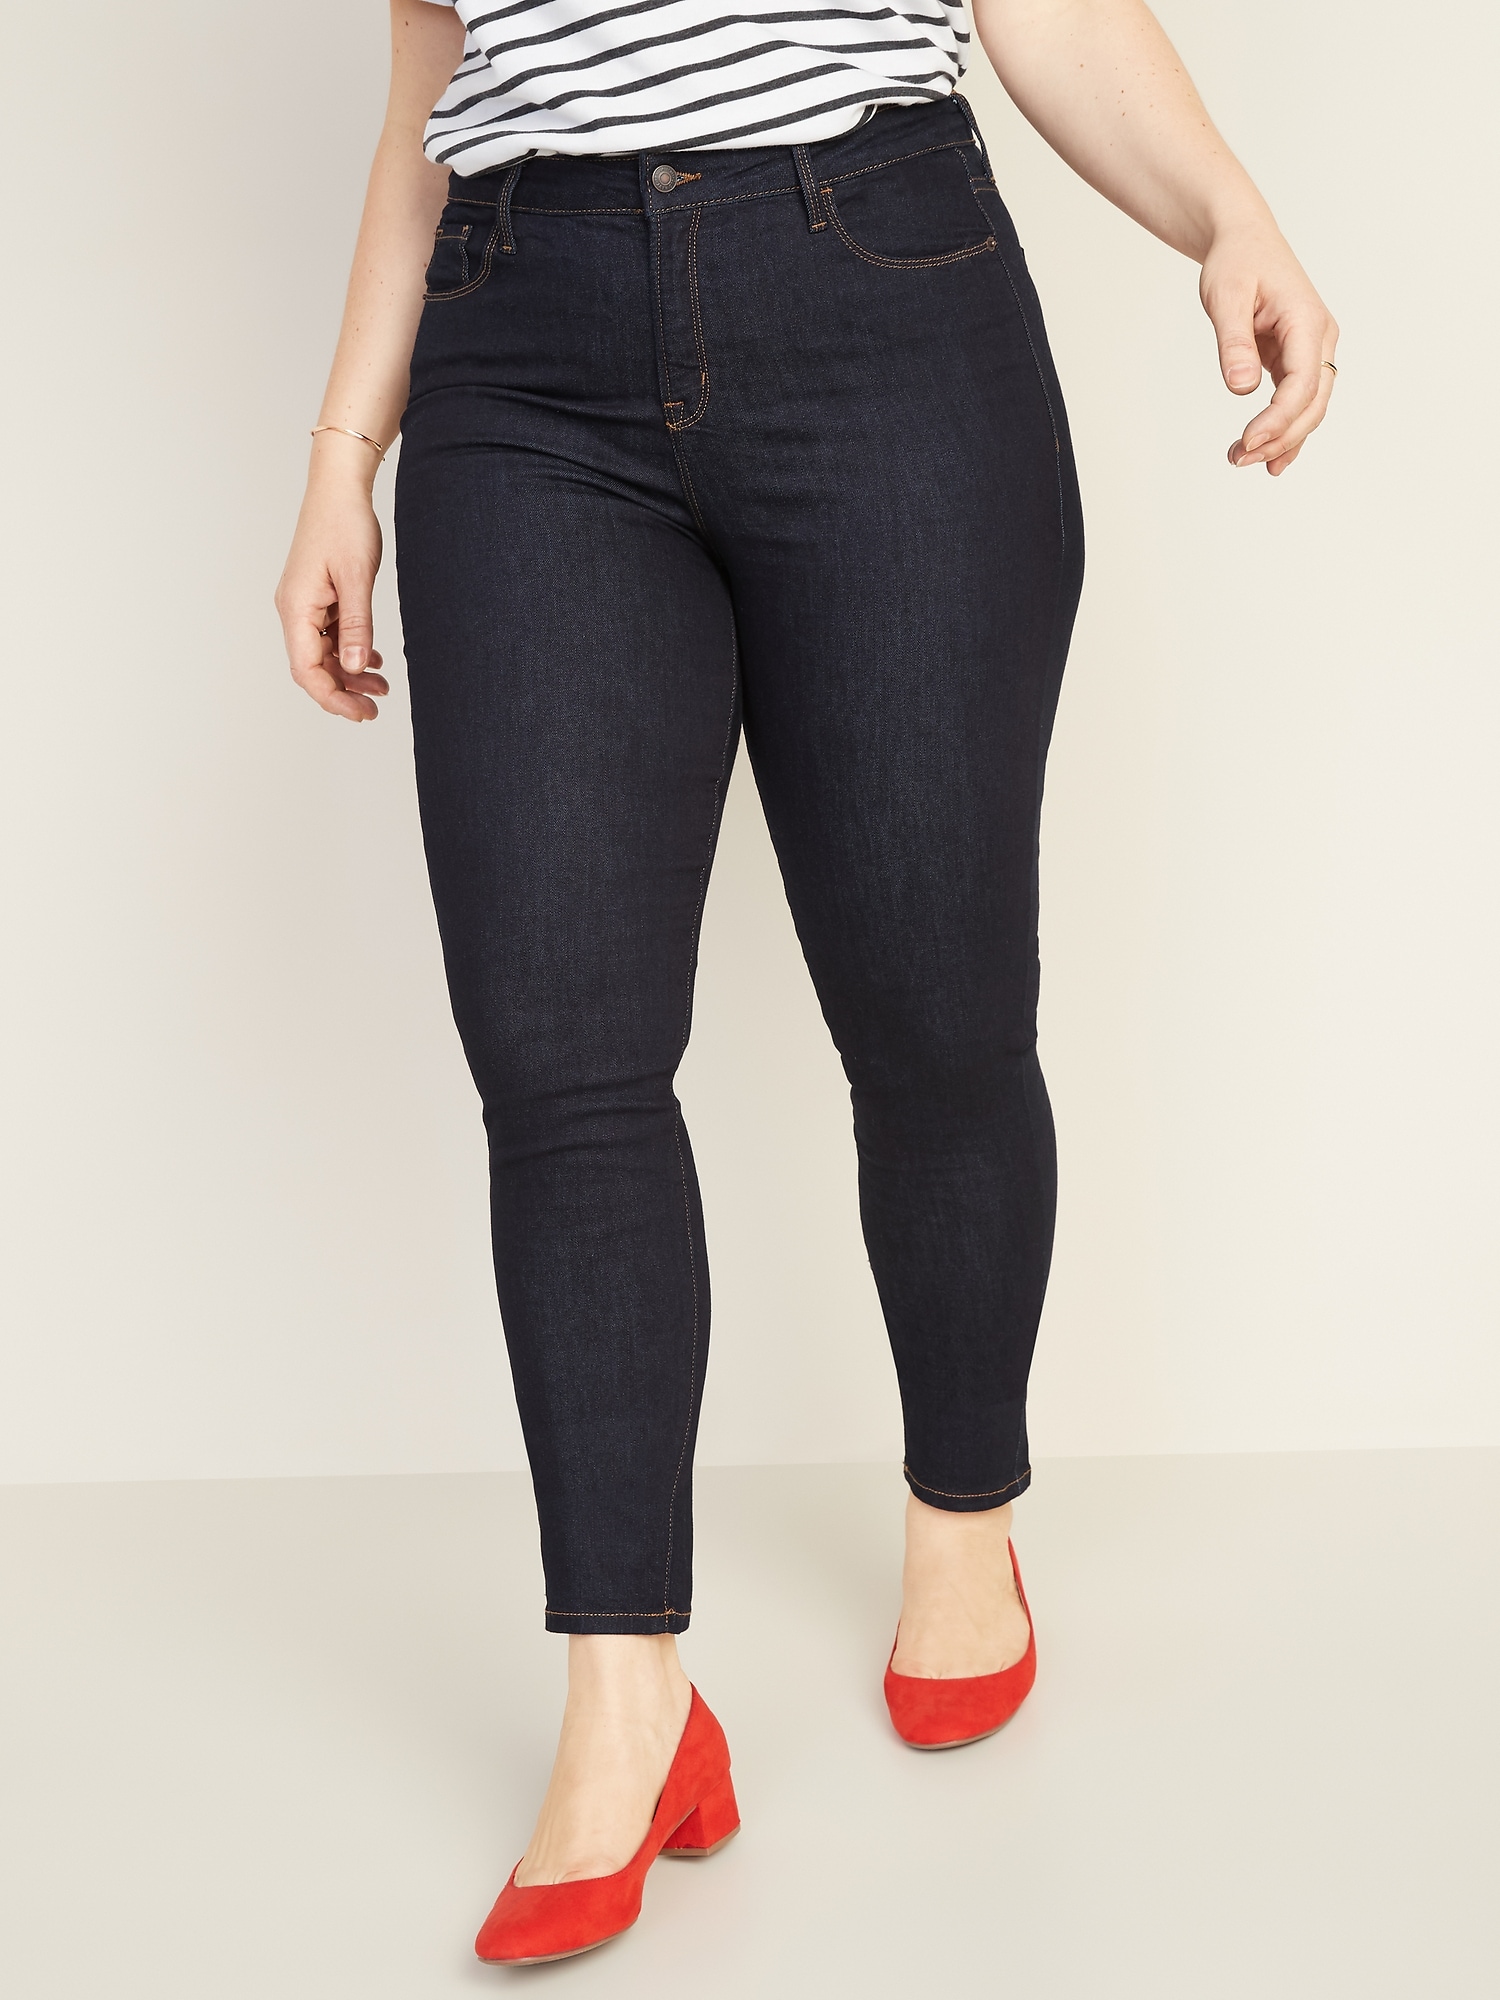 high-waisted-rockstar-super-skinny-jeans-for-women-old-navy